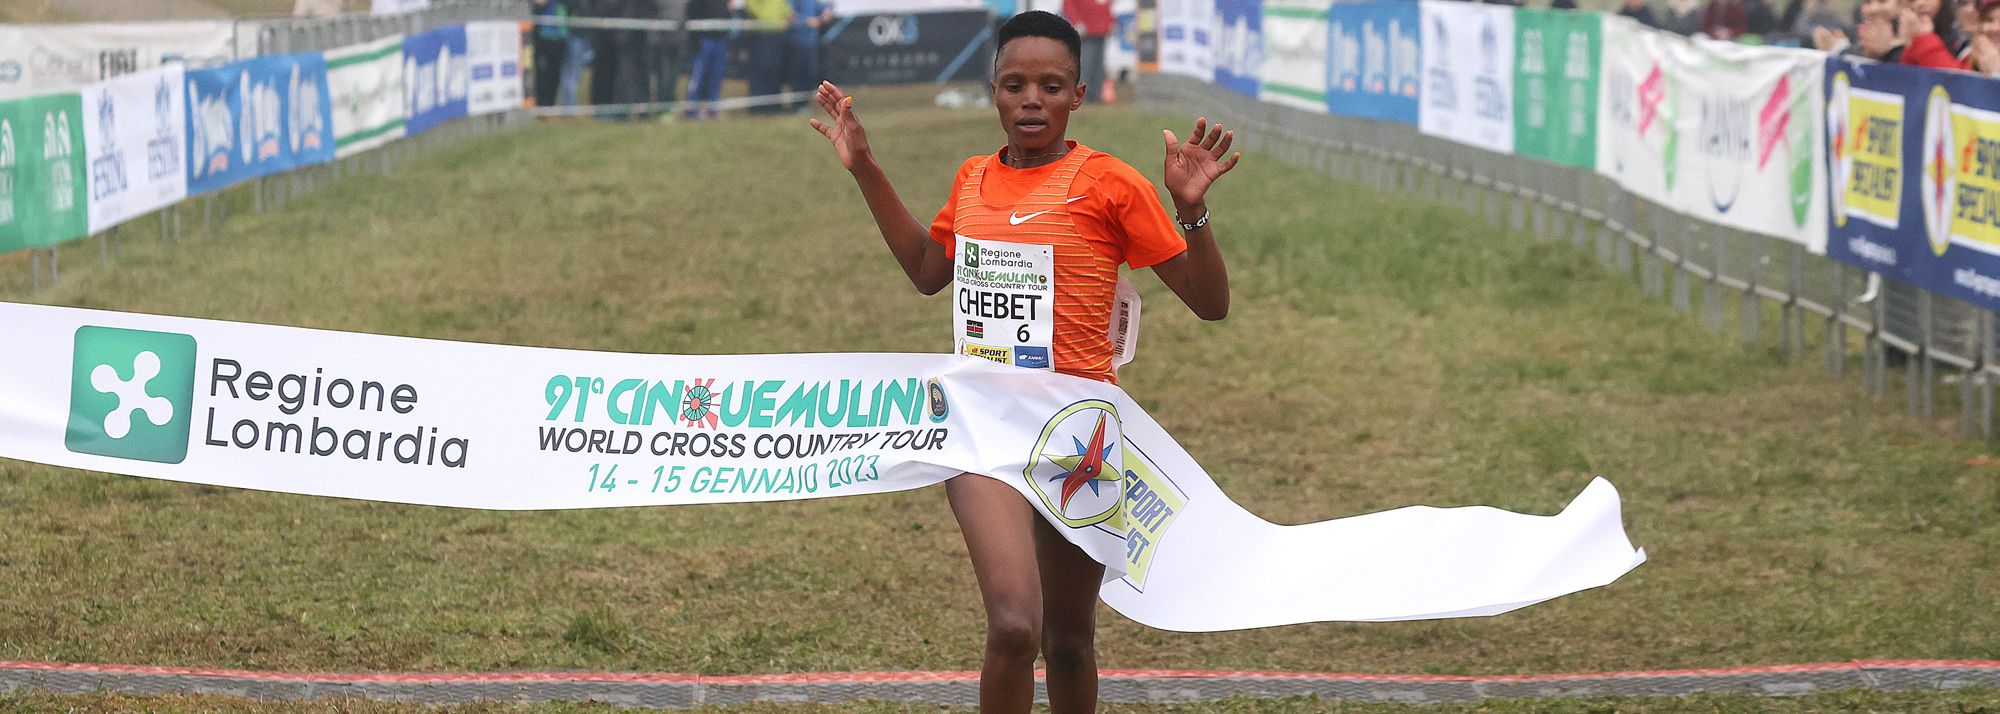 Kenyan duo Beatrice Chebet and Gideon Rono were victorious at the Cinque Mulini in San Vittore Olona